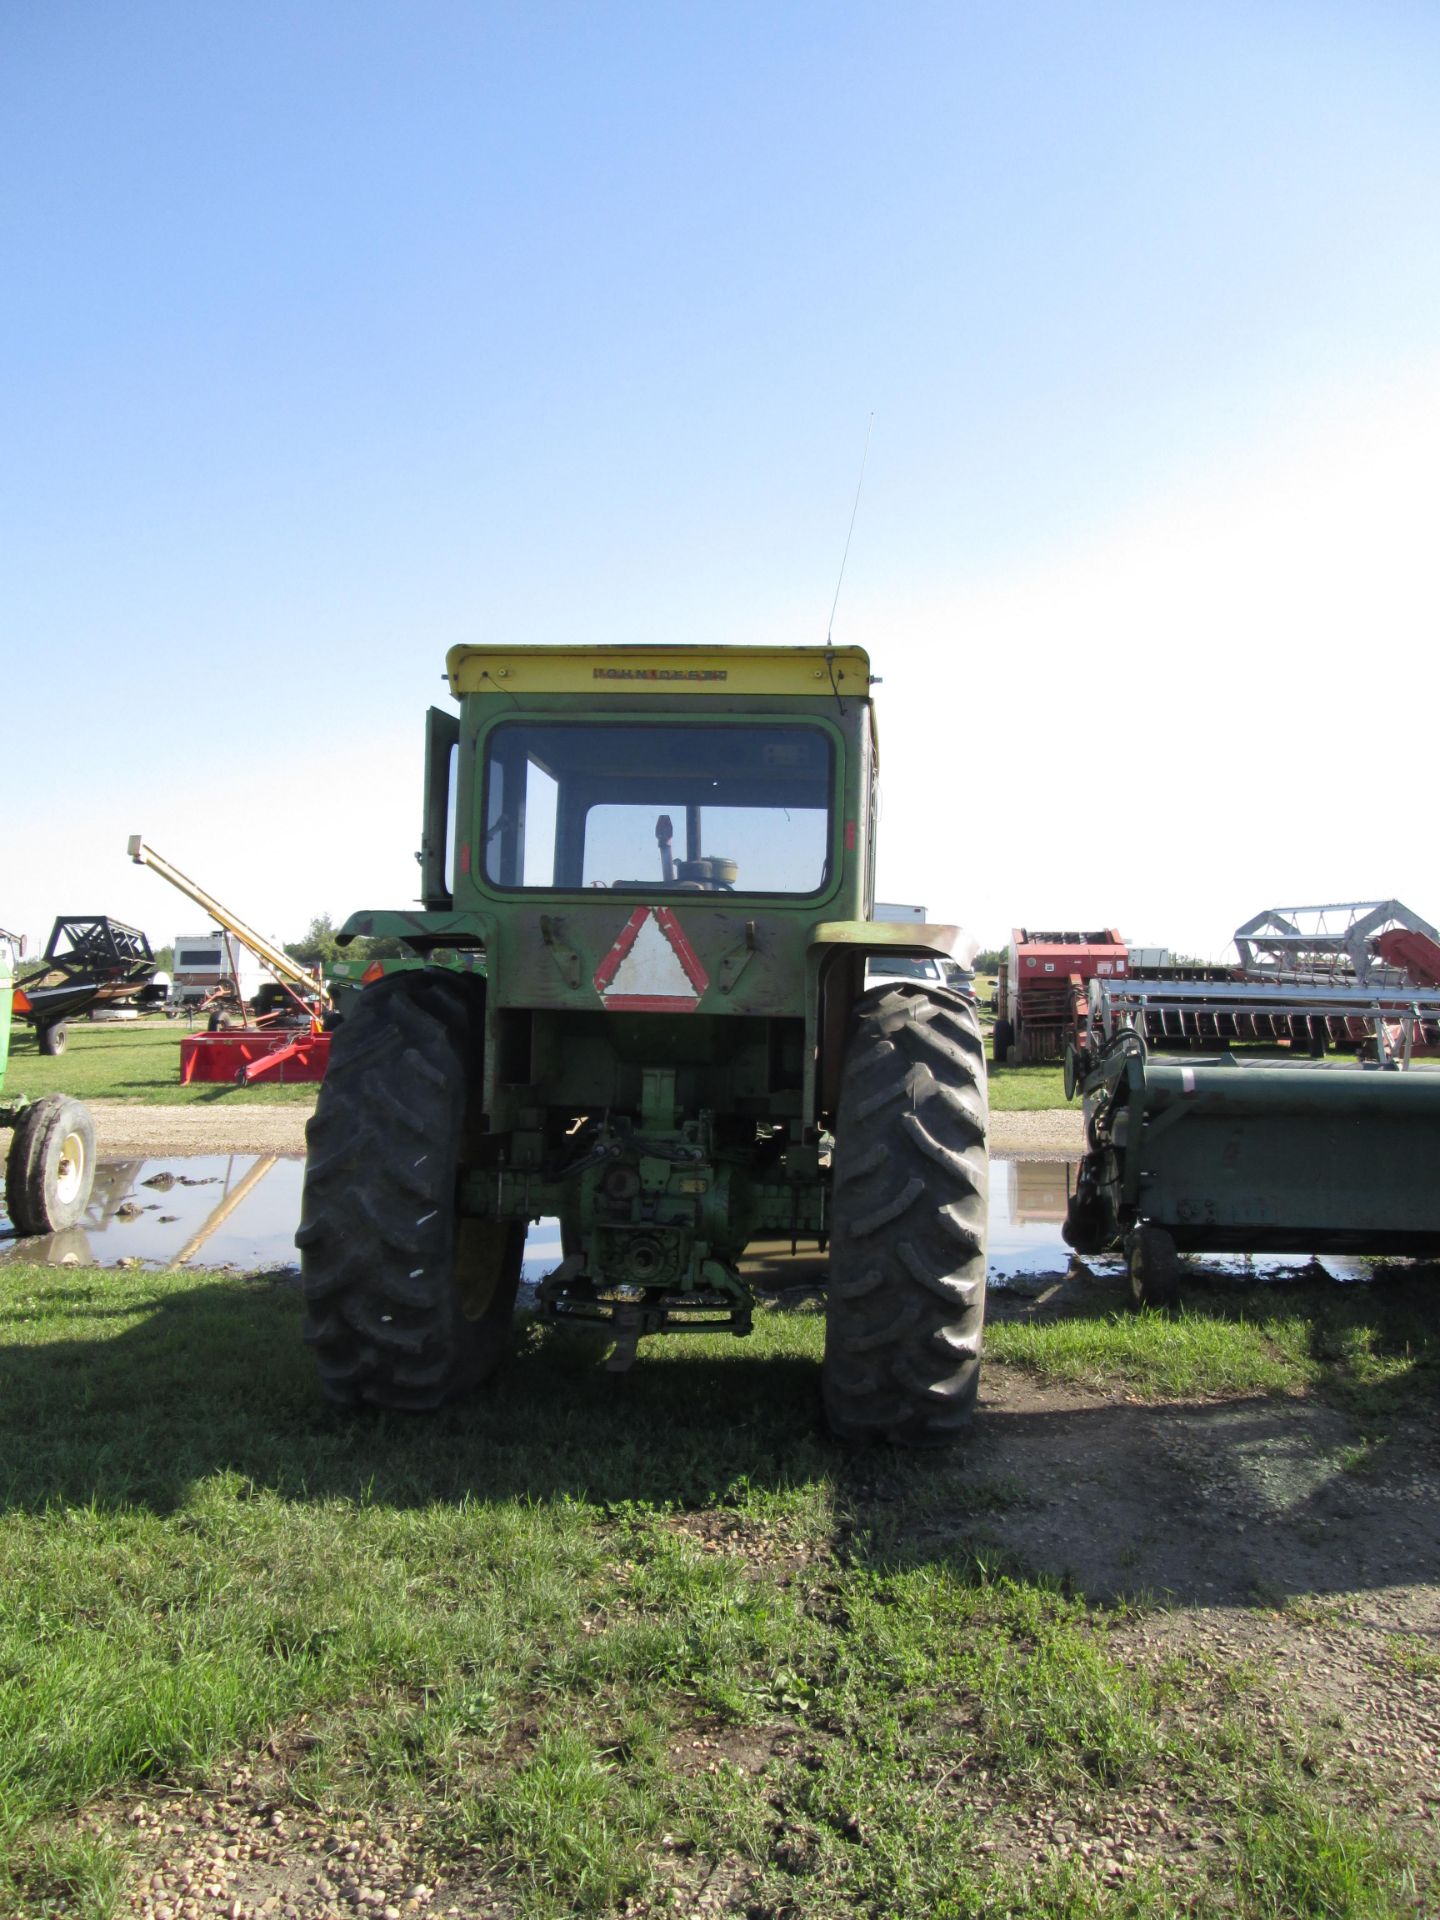 1964 JD 4020 TRACTOR C/W 46A LOADER & BUCKET - Image 3 of 3